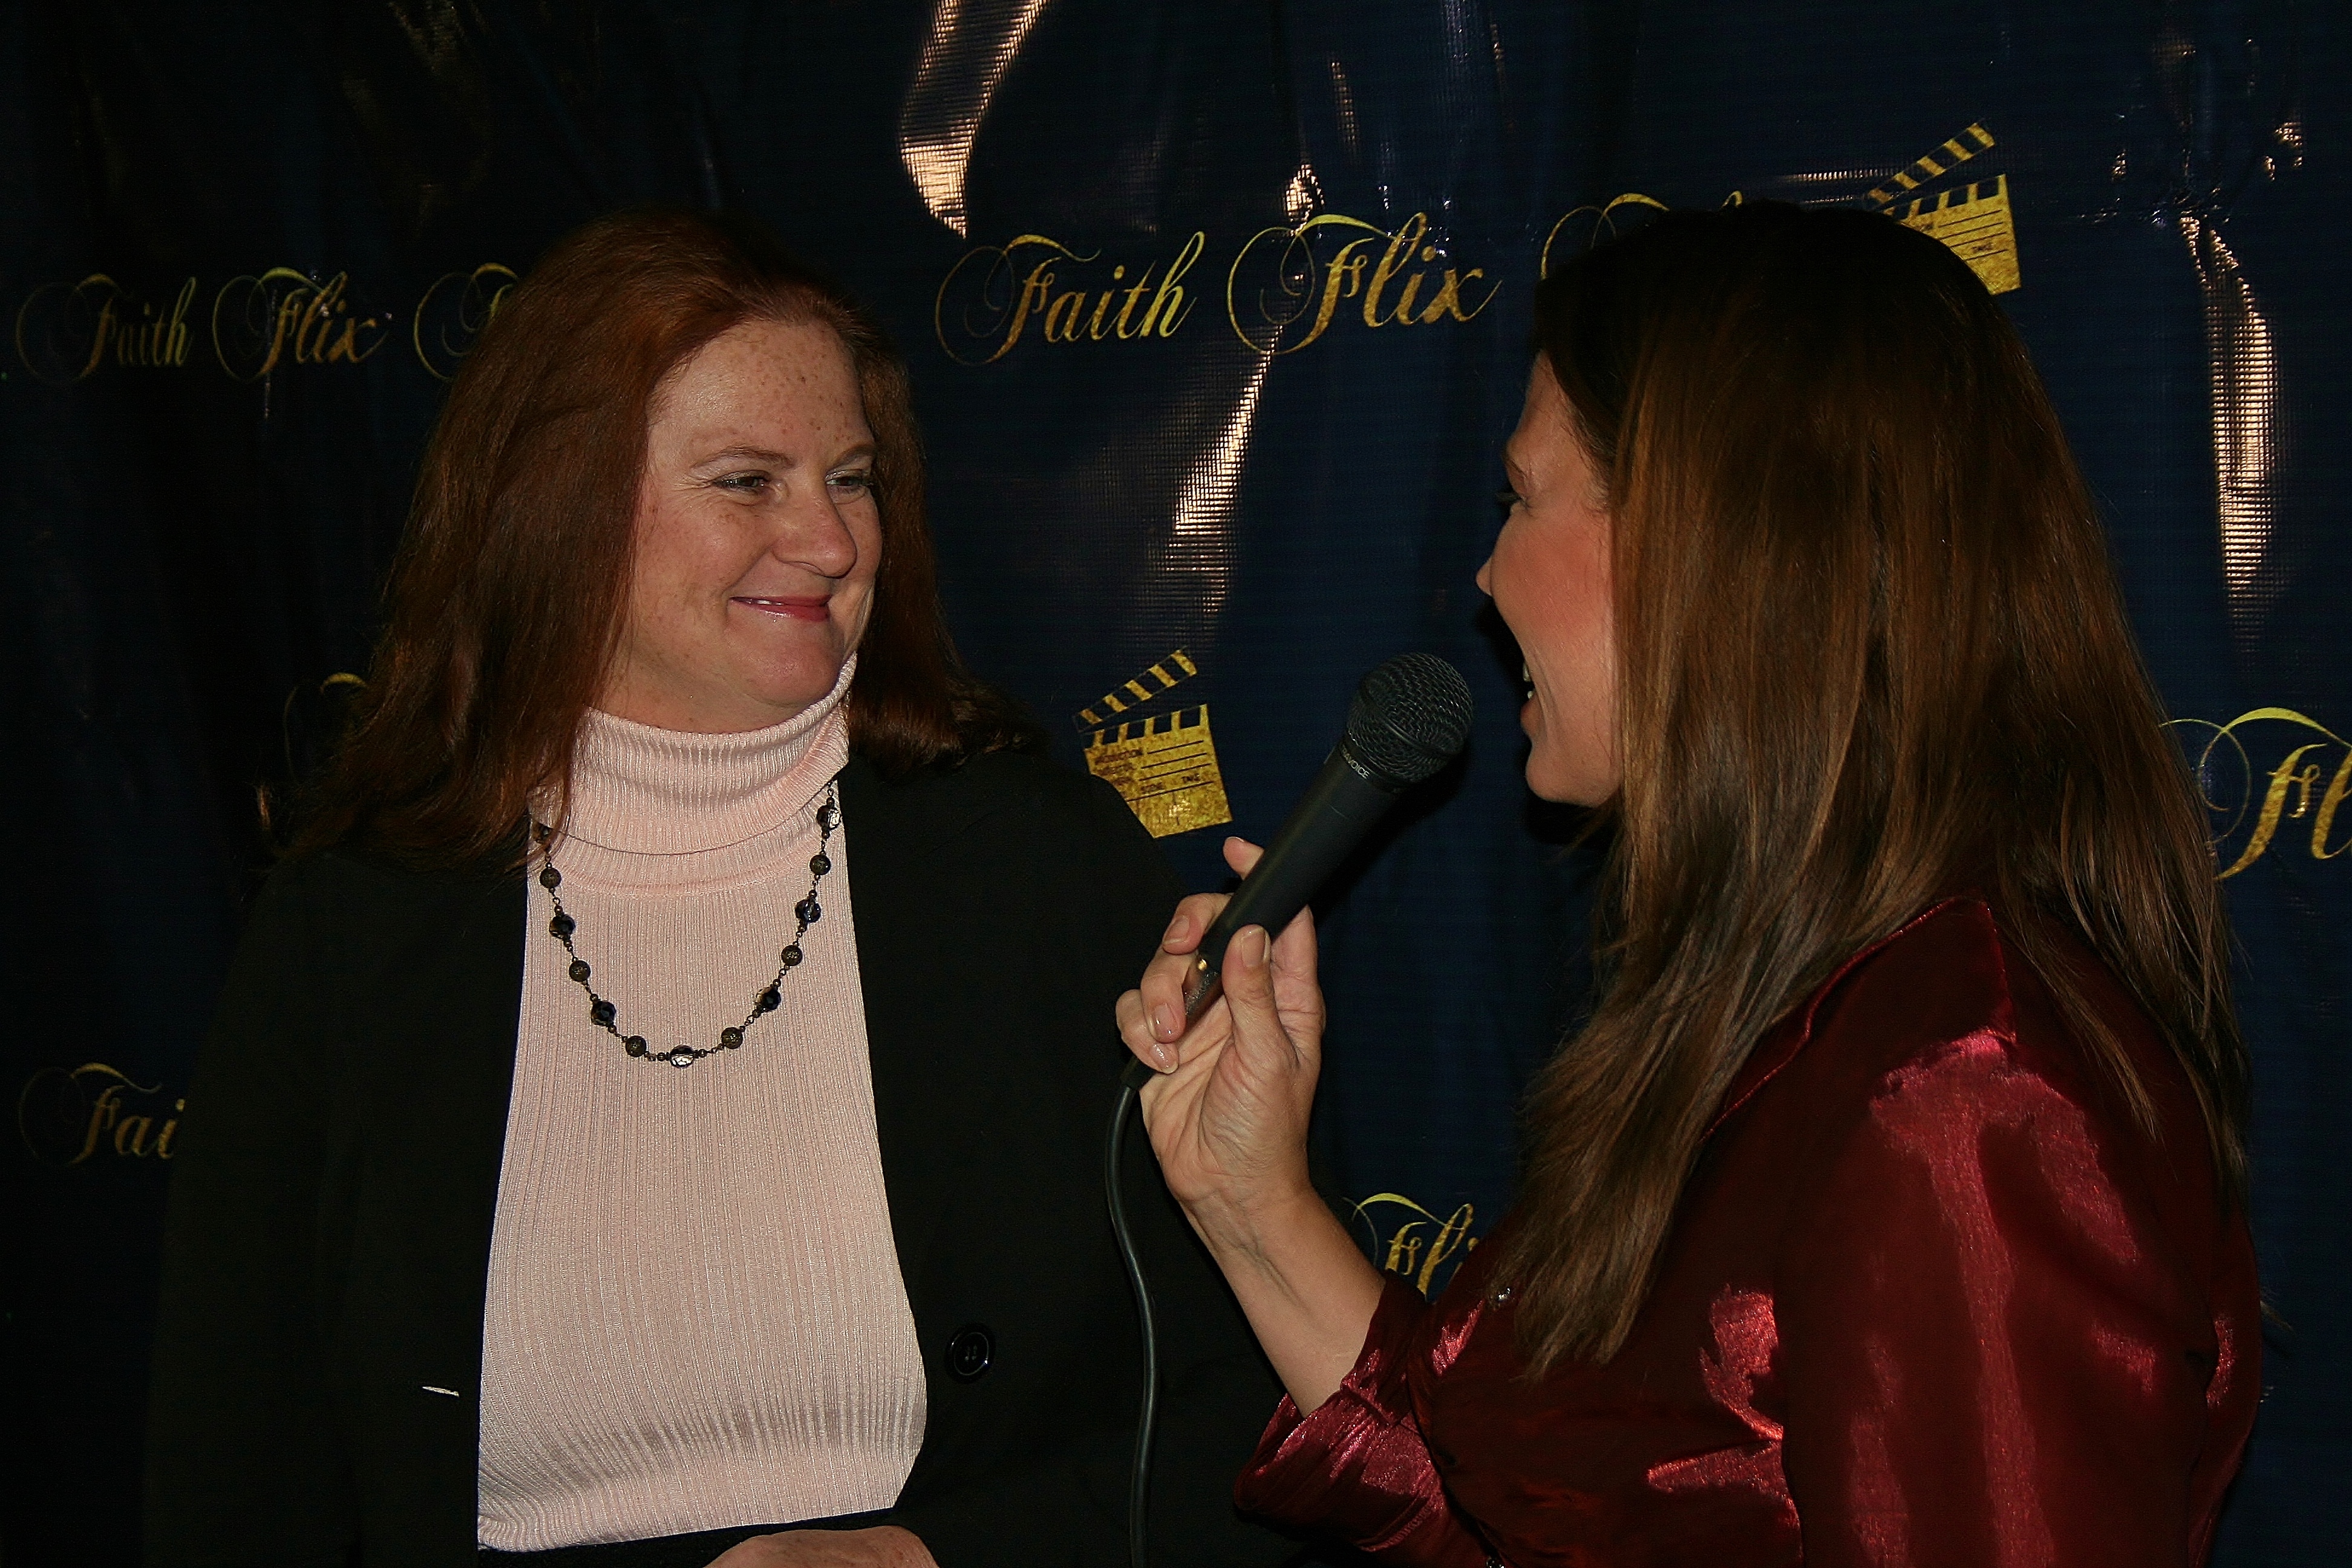 Being interviewed on the Providence Red Carpet.